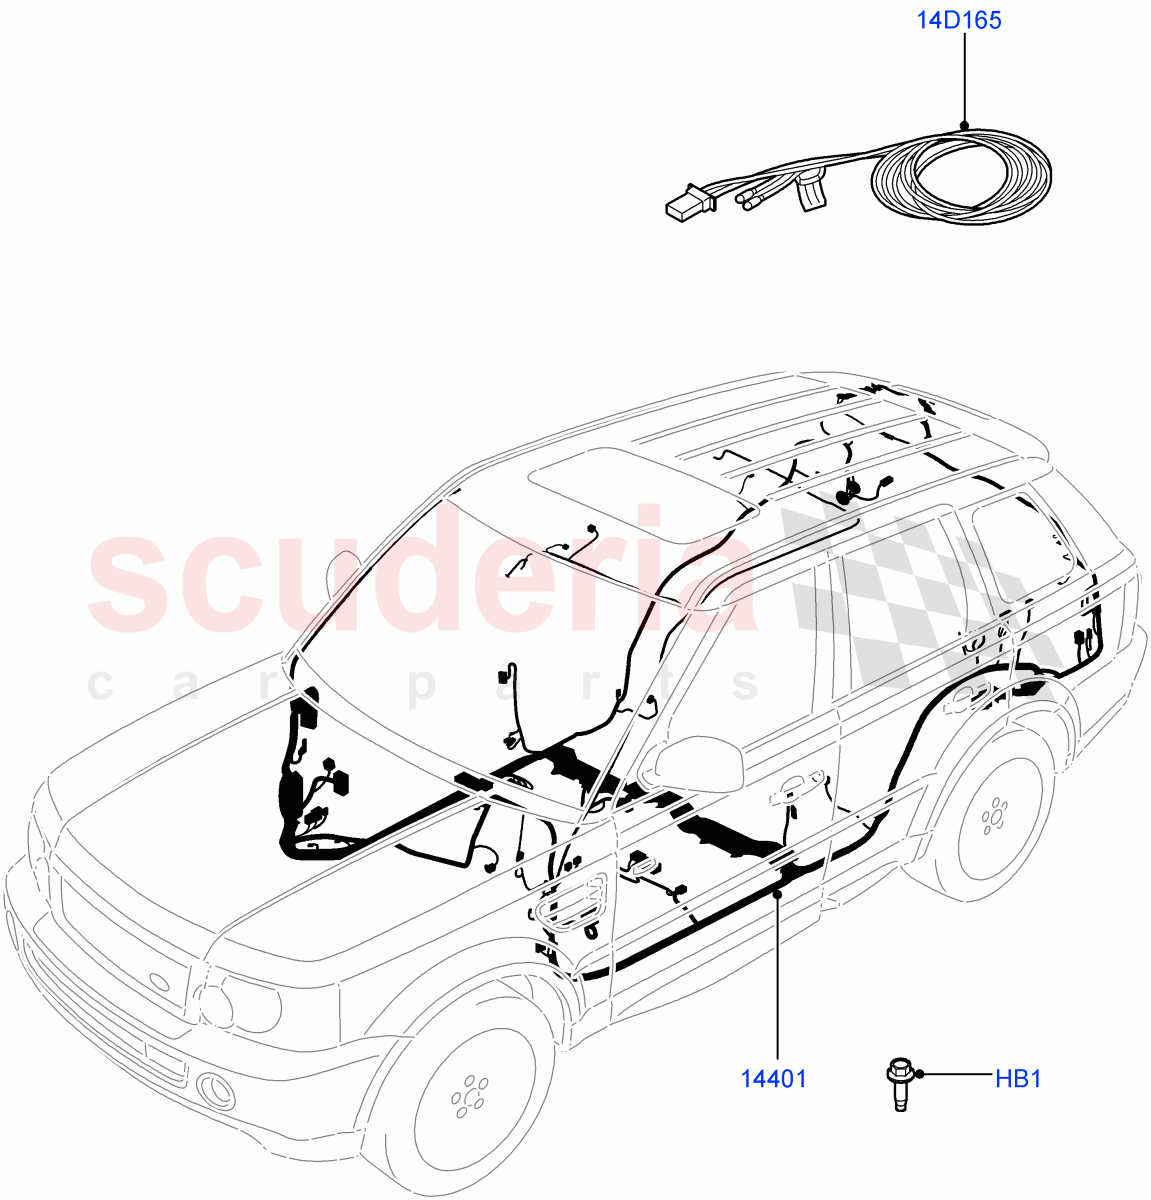 Electrical Wiring - Engine And Dash(Main Harness)((V)FROMAA000001,(V)TOAA999999) of Land Rover Land Rover Range Rover Sport (2010-2013) [5.0 OHC SGDI NA V8 Petrol]